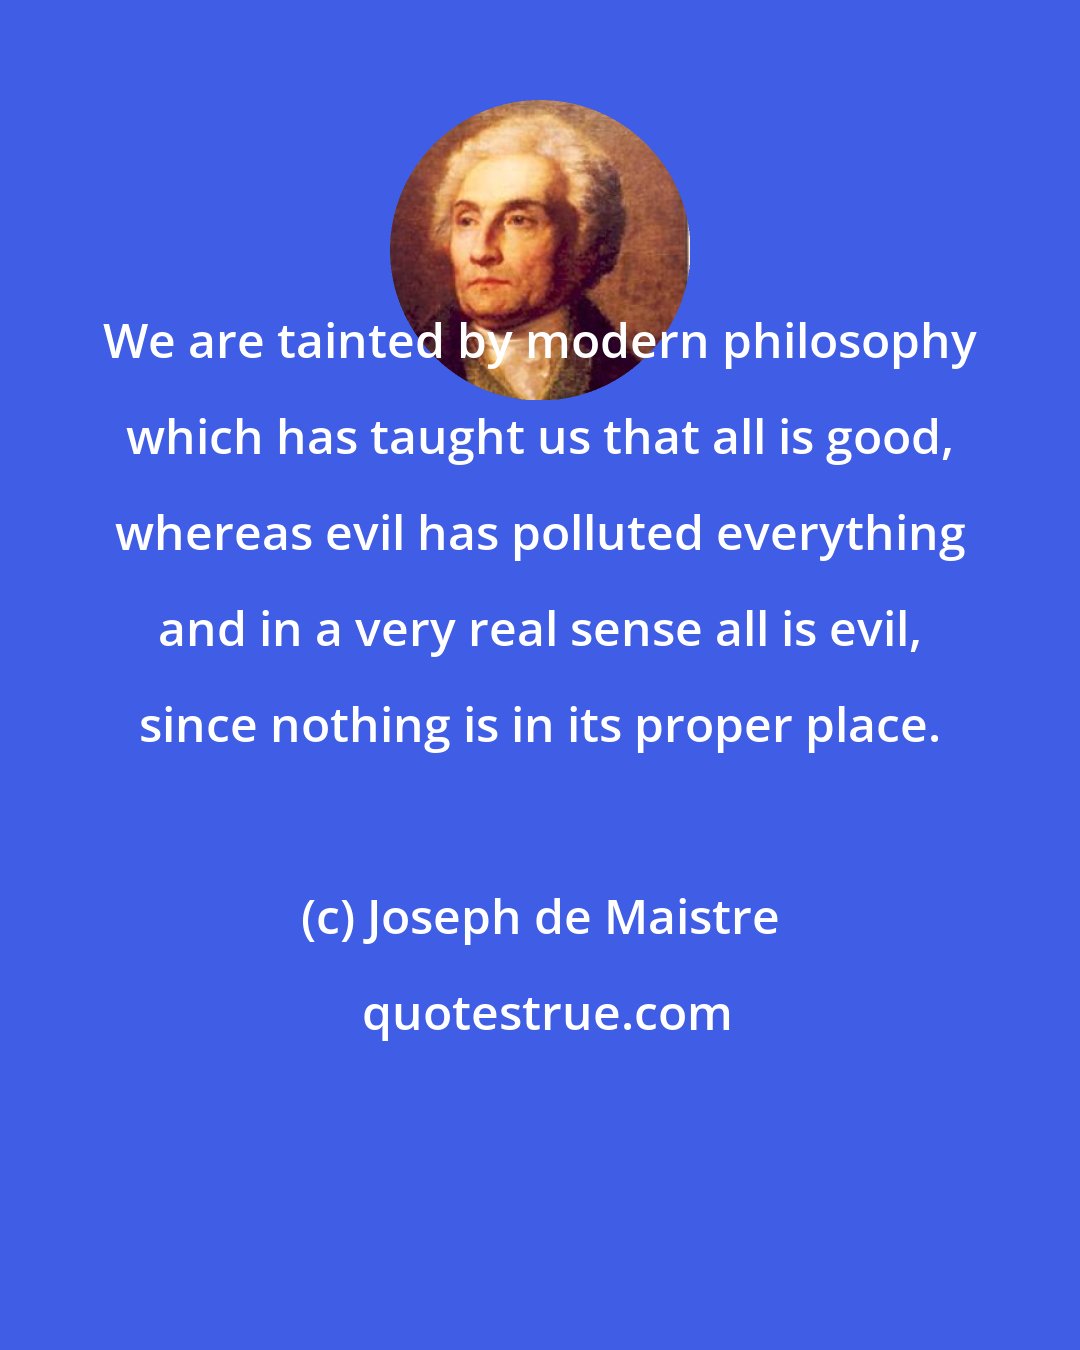 Joseph de Maistre: We are tainted by modern philosophy which has taught us that all is good, whereas evil has polluted everything and in a very real sense all is evil, since nothing is in its proper place.